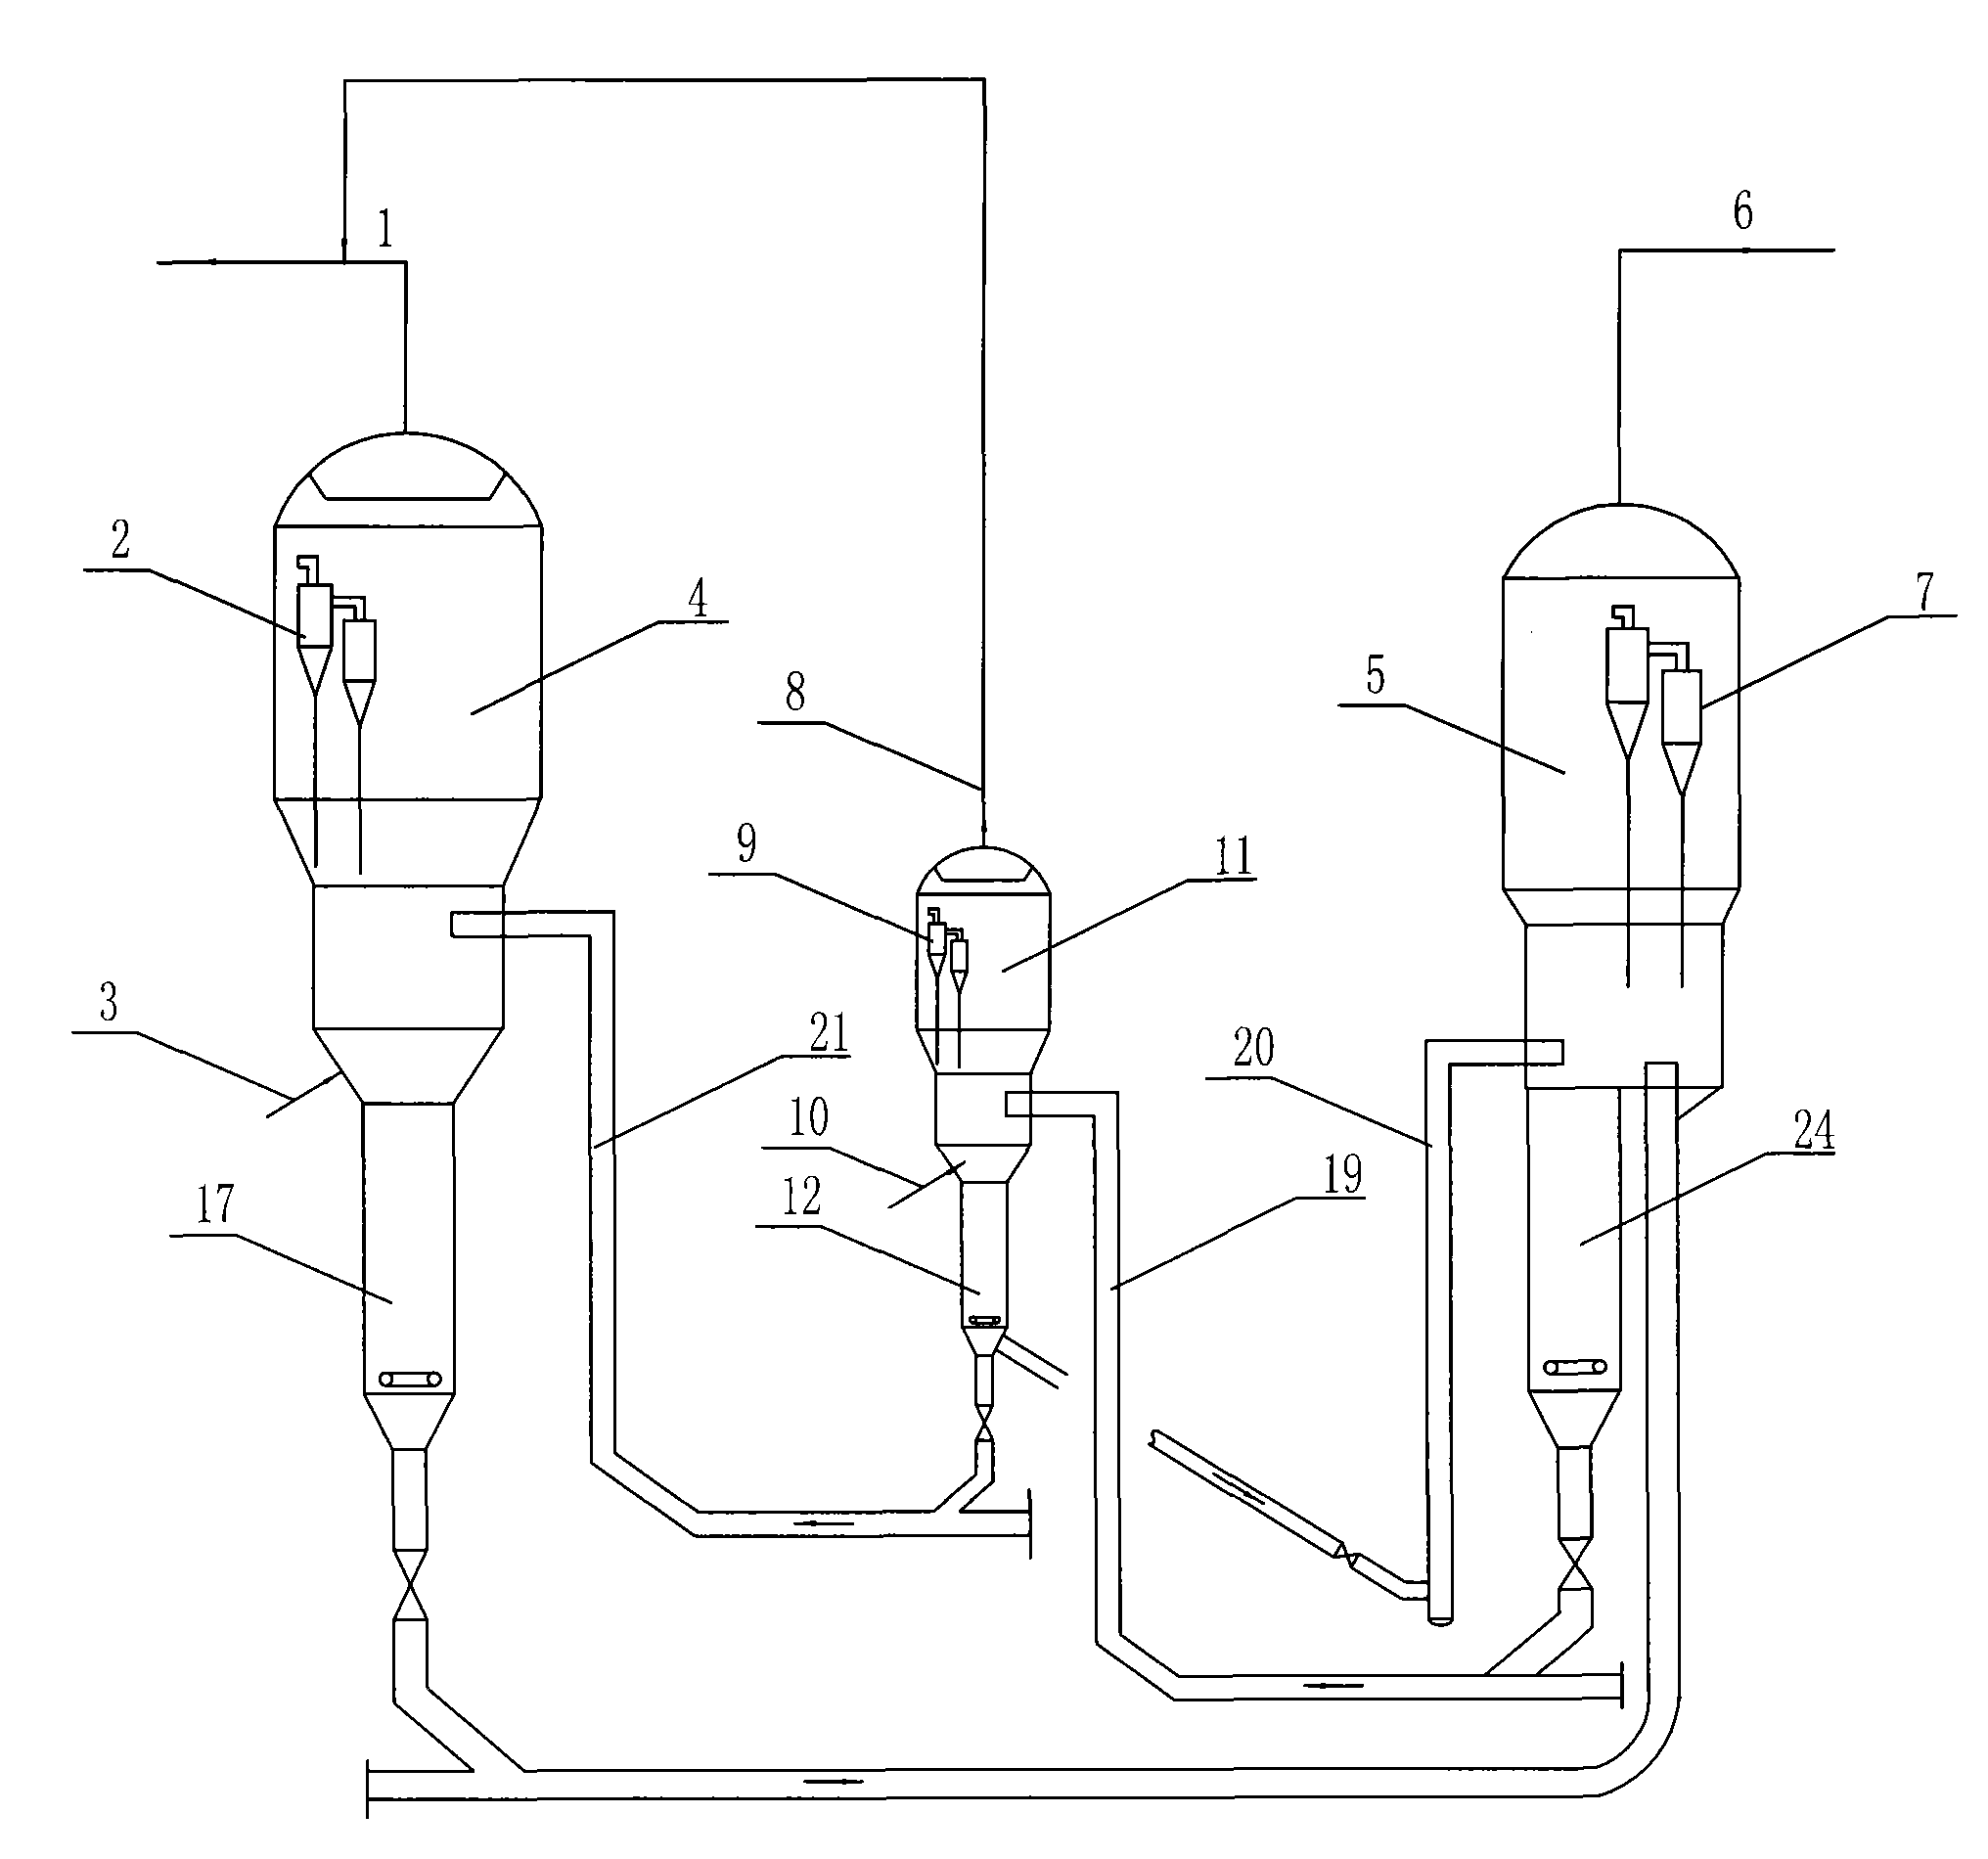 Conversion method of C4 and heavier components